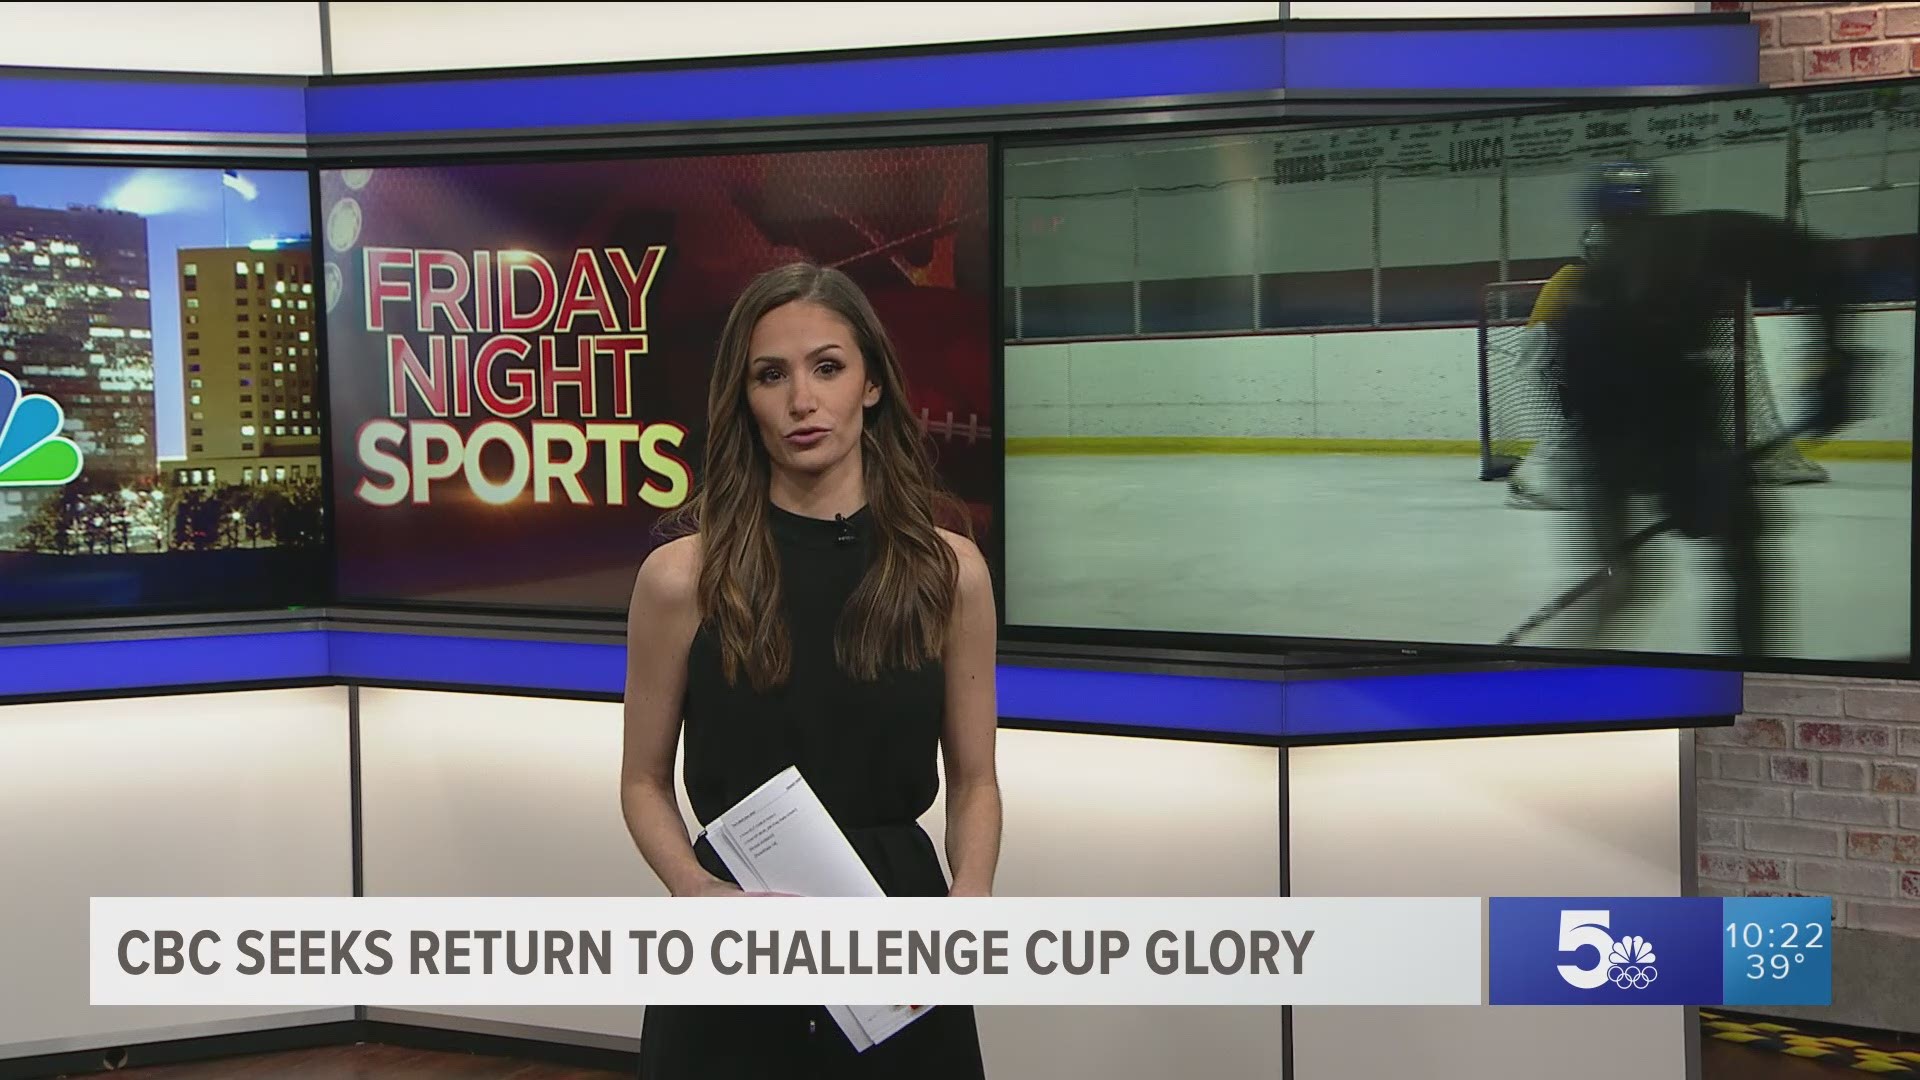 CBC Hockey returns to the Challenge Cup Championship game for first time in two years with high hopes for their seventeenth ring